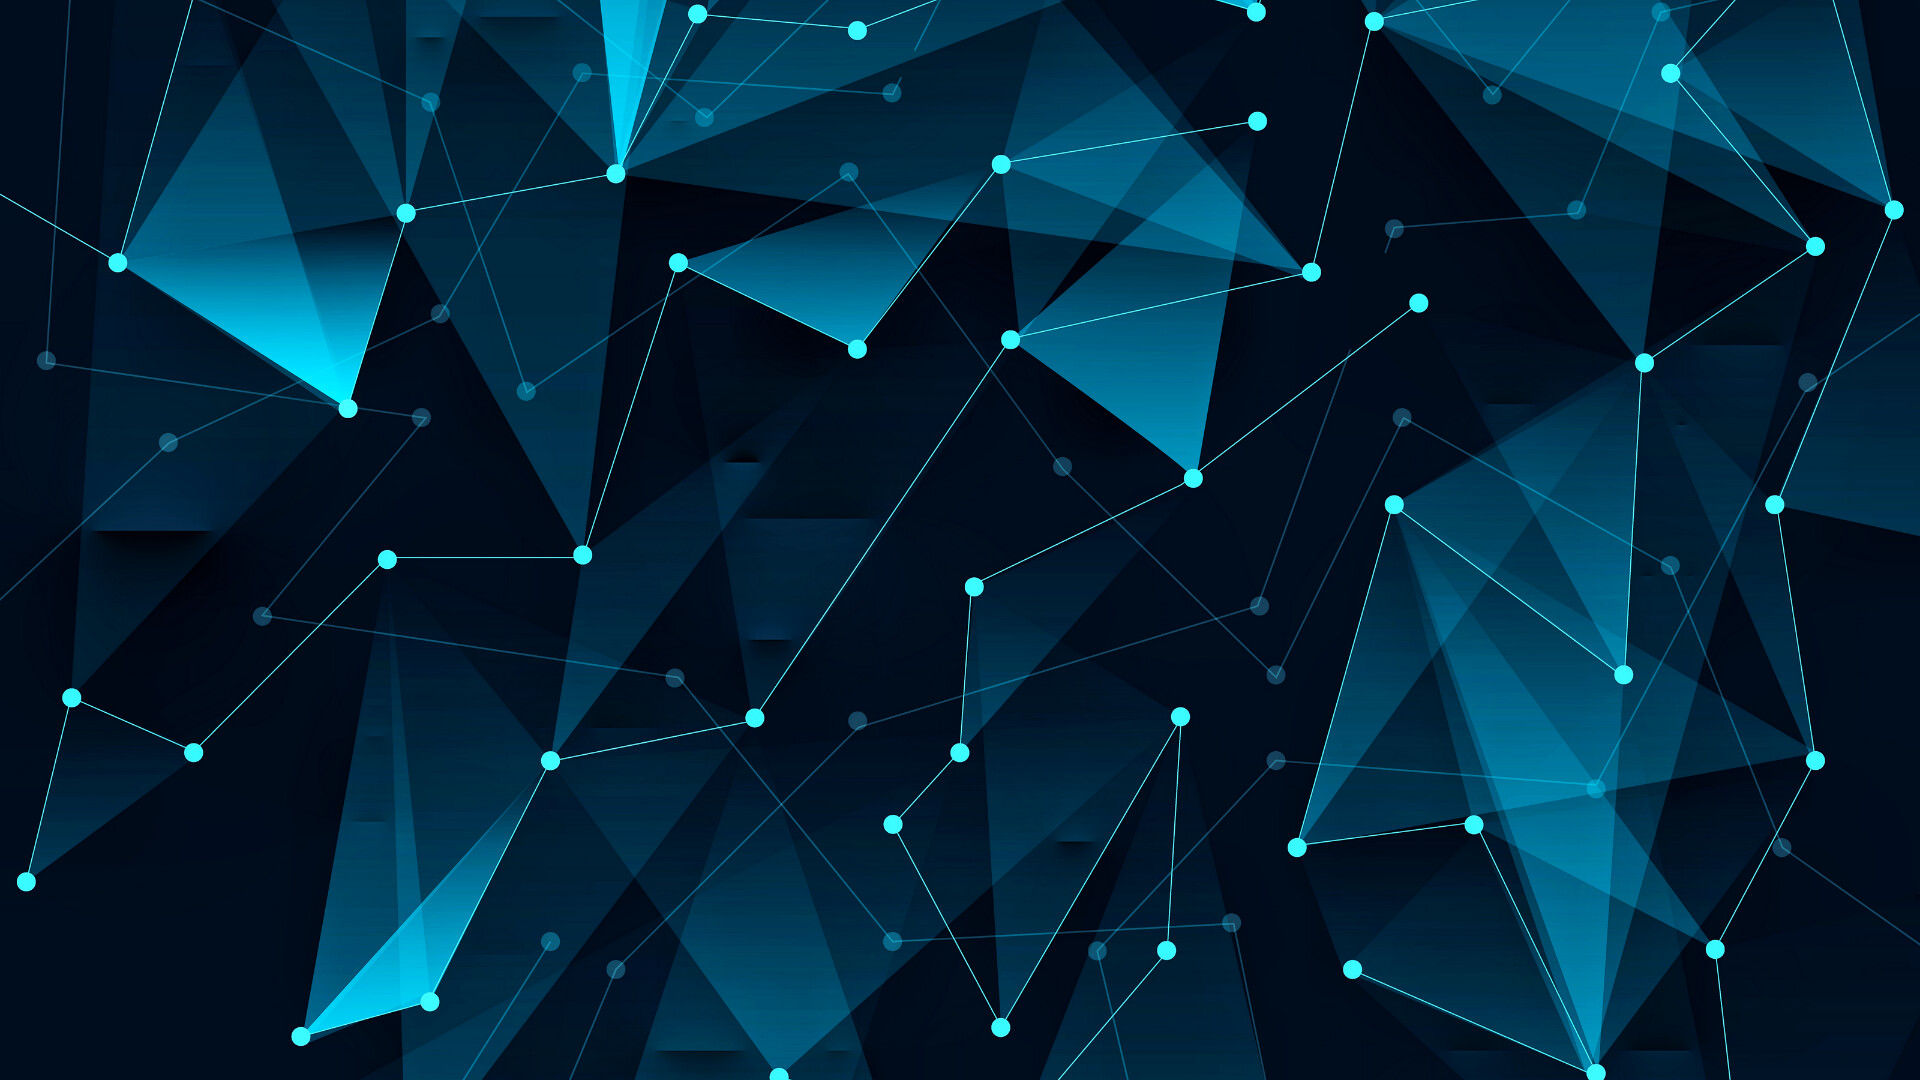 Geometry: Polygons, Dots, Digital art, Abstract, Obtuse angles. 1920x1080 Full HD Background.